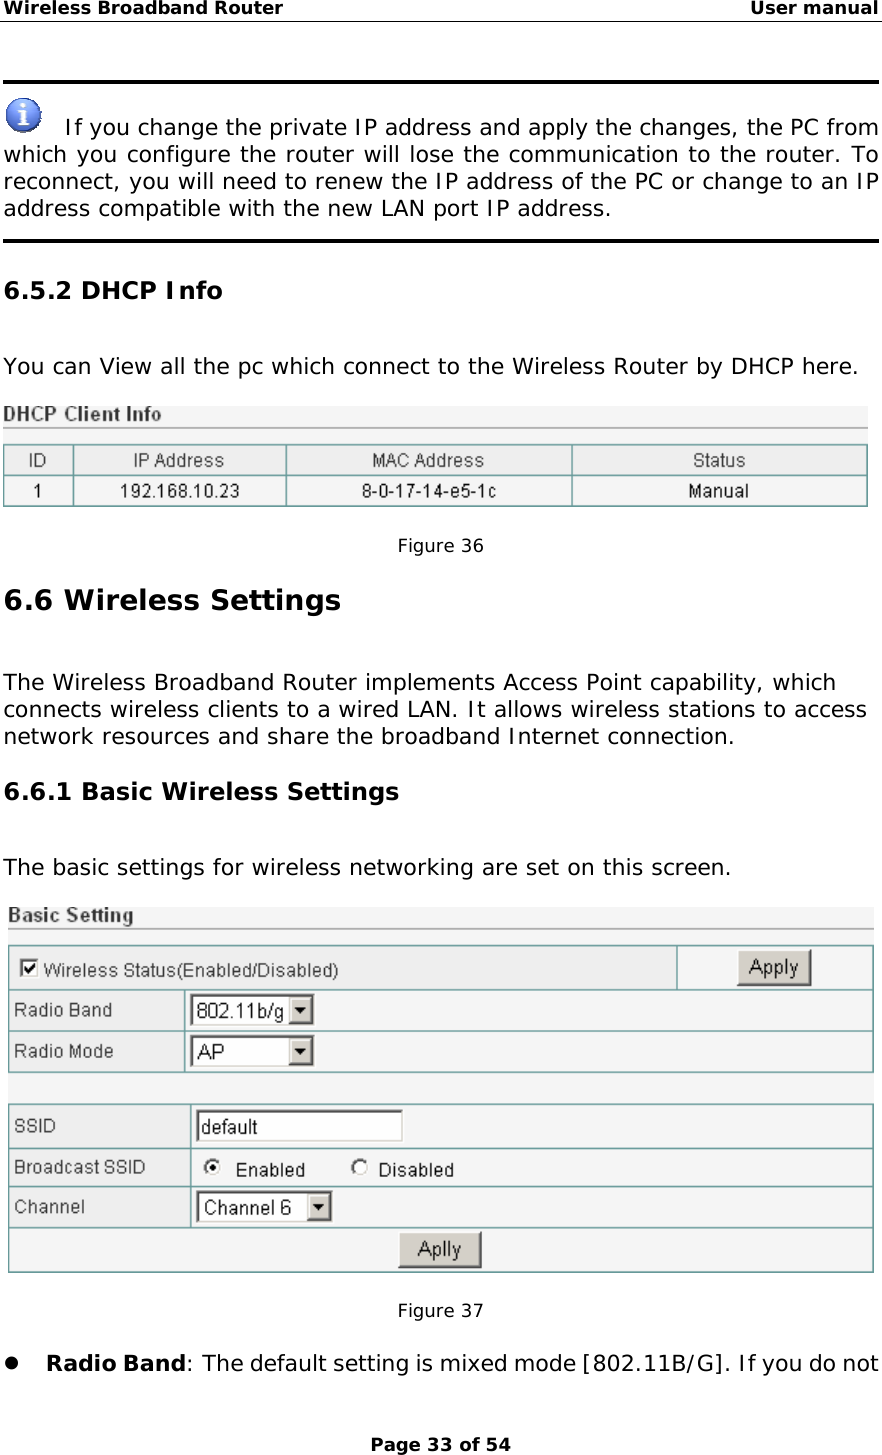 Wireless Broadband Router                                                   User manual Page 33 of 54    If you change the private IP address and apply the changes, the PC from which you configure the router will lose the communication to the router. To reconnect, you will need to renew the IP address of the PC or change to an IP address compatible with the new LAN port IP address.  6.5.2 DHCP Info You can View all the pc which connect to the Wireless Router by DHCP here.    Figure 36 6.6 Wireless Settings The Wireless Broadband Router implements Access Point capability, which connects wireless clients to a wired LAN. It allows wireless stations to access network resources and share the broadband Internet connection. 6.6.1 Basic Wireless Settings The basic settings for wireless networking are set on this screen.    Figure 37  z Radio Band: The default setting is mixed mode [802.11B/G]. If you do not 